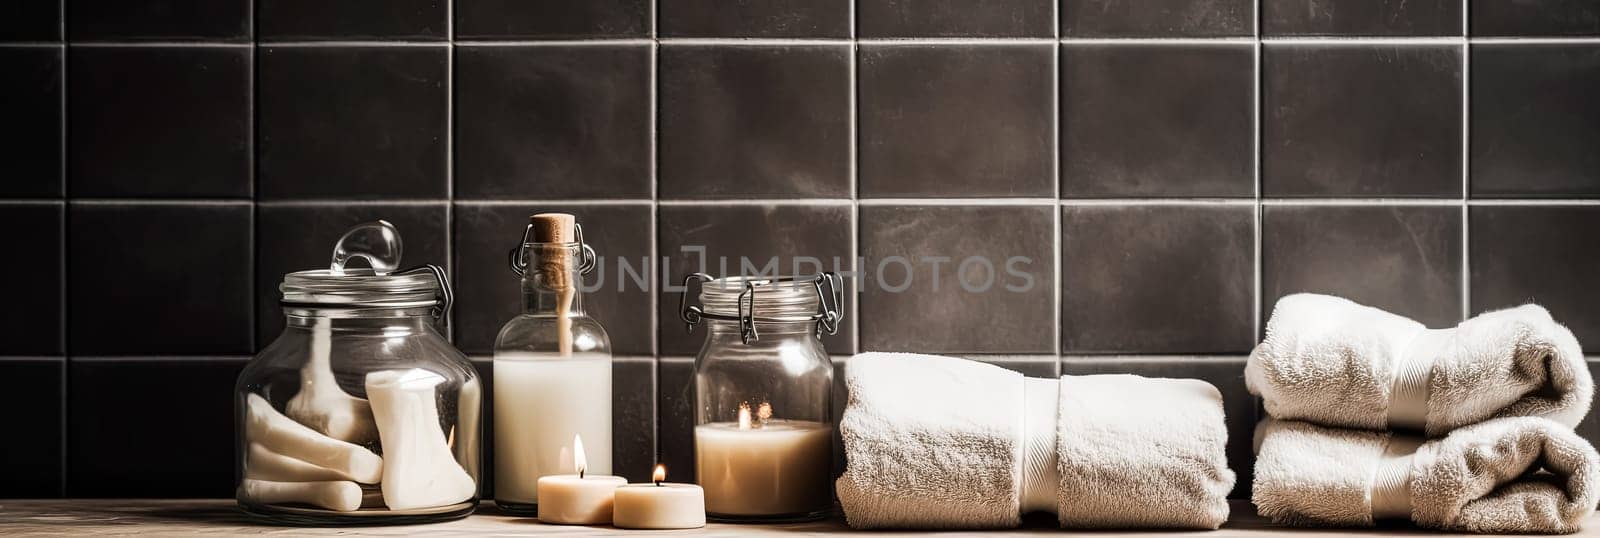 A bathroom with a countertop full of candles, lotion, and towels. The candles are lit and the towels are neatly stacked. Concept of relaxation and self-care